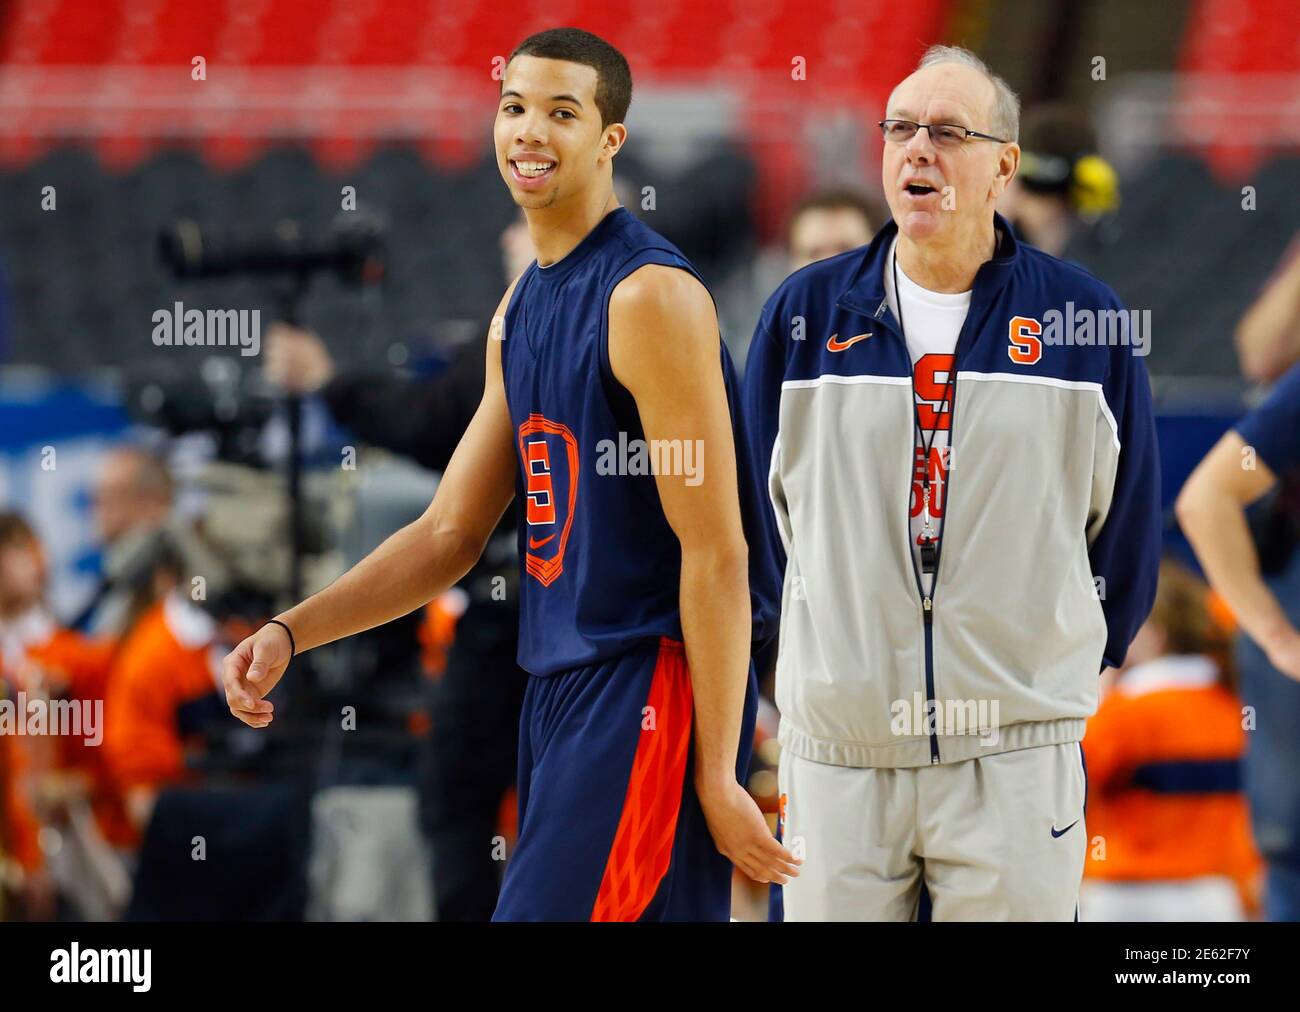 Syracuse Orange head coach Jim Boeheim (R) talks with Michael  Carter-Williams during practice for the NCAA men's basketball Final Four in  Atlanta, Georgia April 5, 2013. REUTERS/Jeff Haynes (UNITED STATES - Tags: